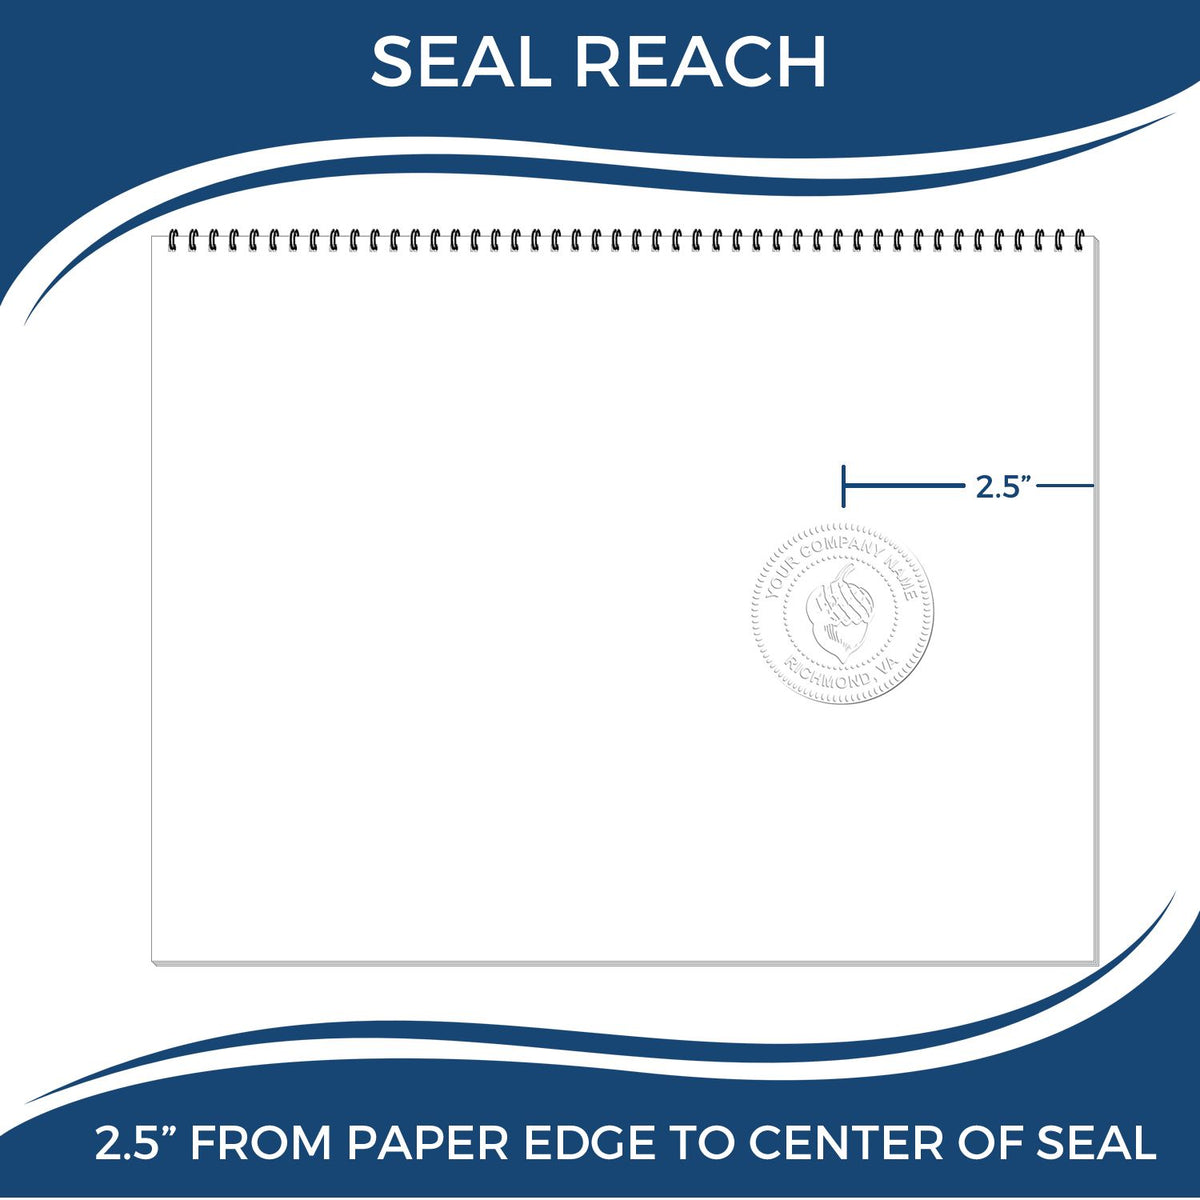 An infographic showing the seal reach which is represented by a ruler and a miniature seal image of the Heavy Duty Cast Iron Maryland Land Surveyor Seal Embosser